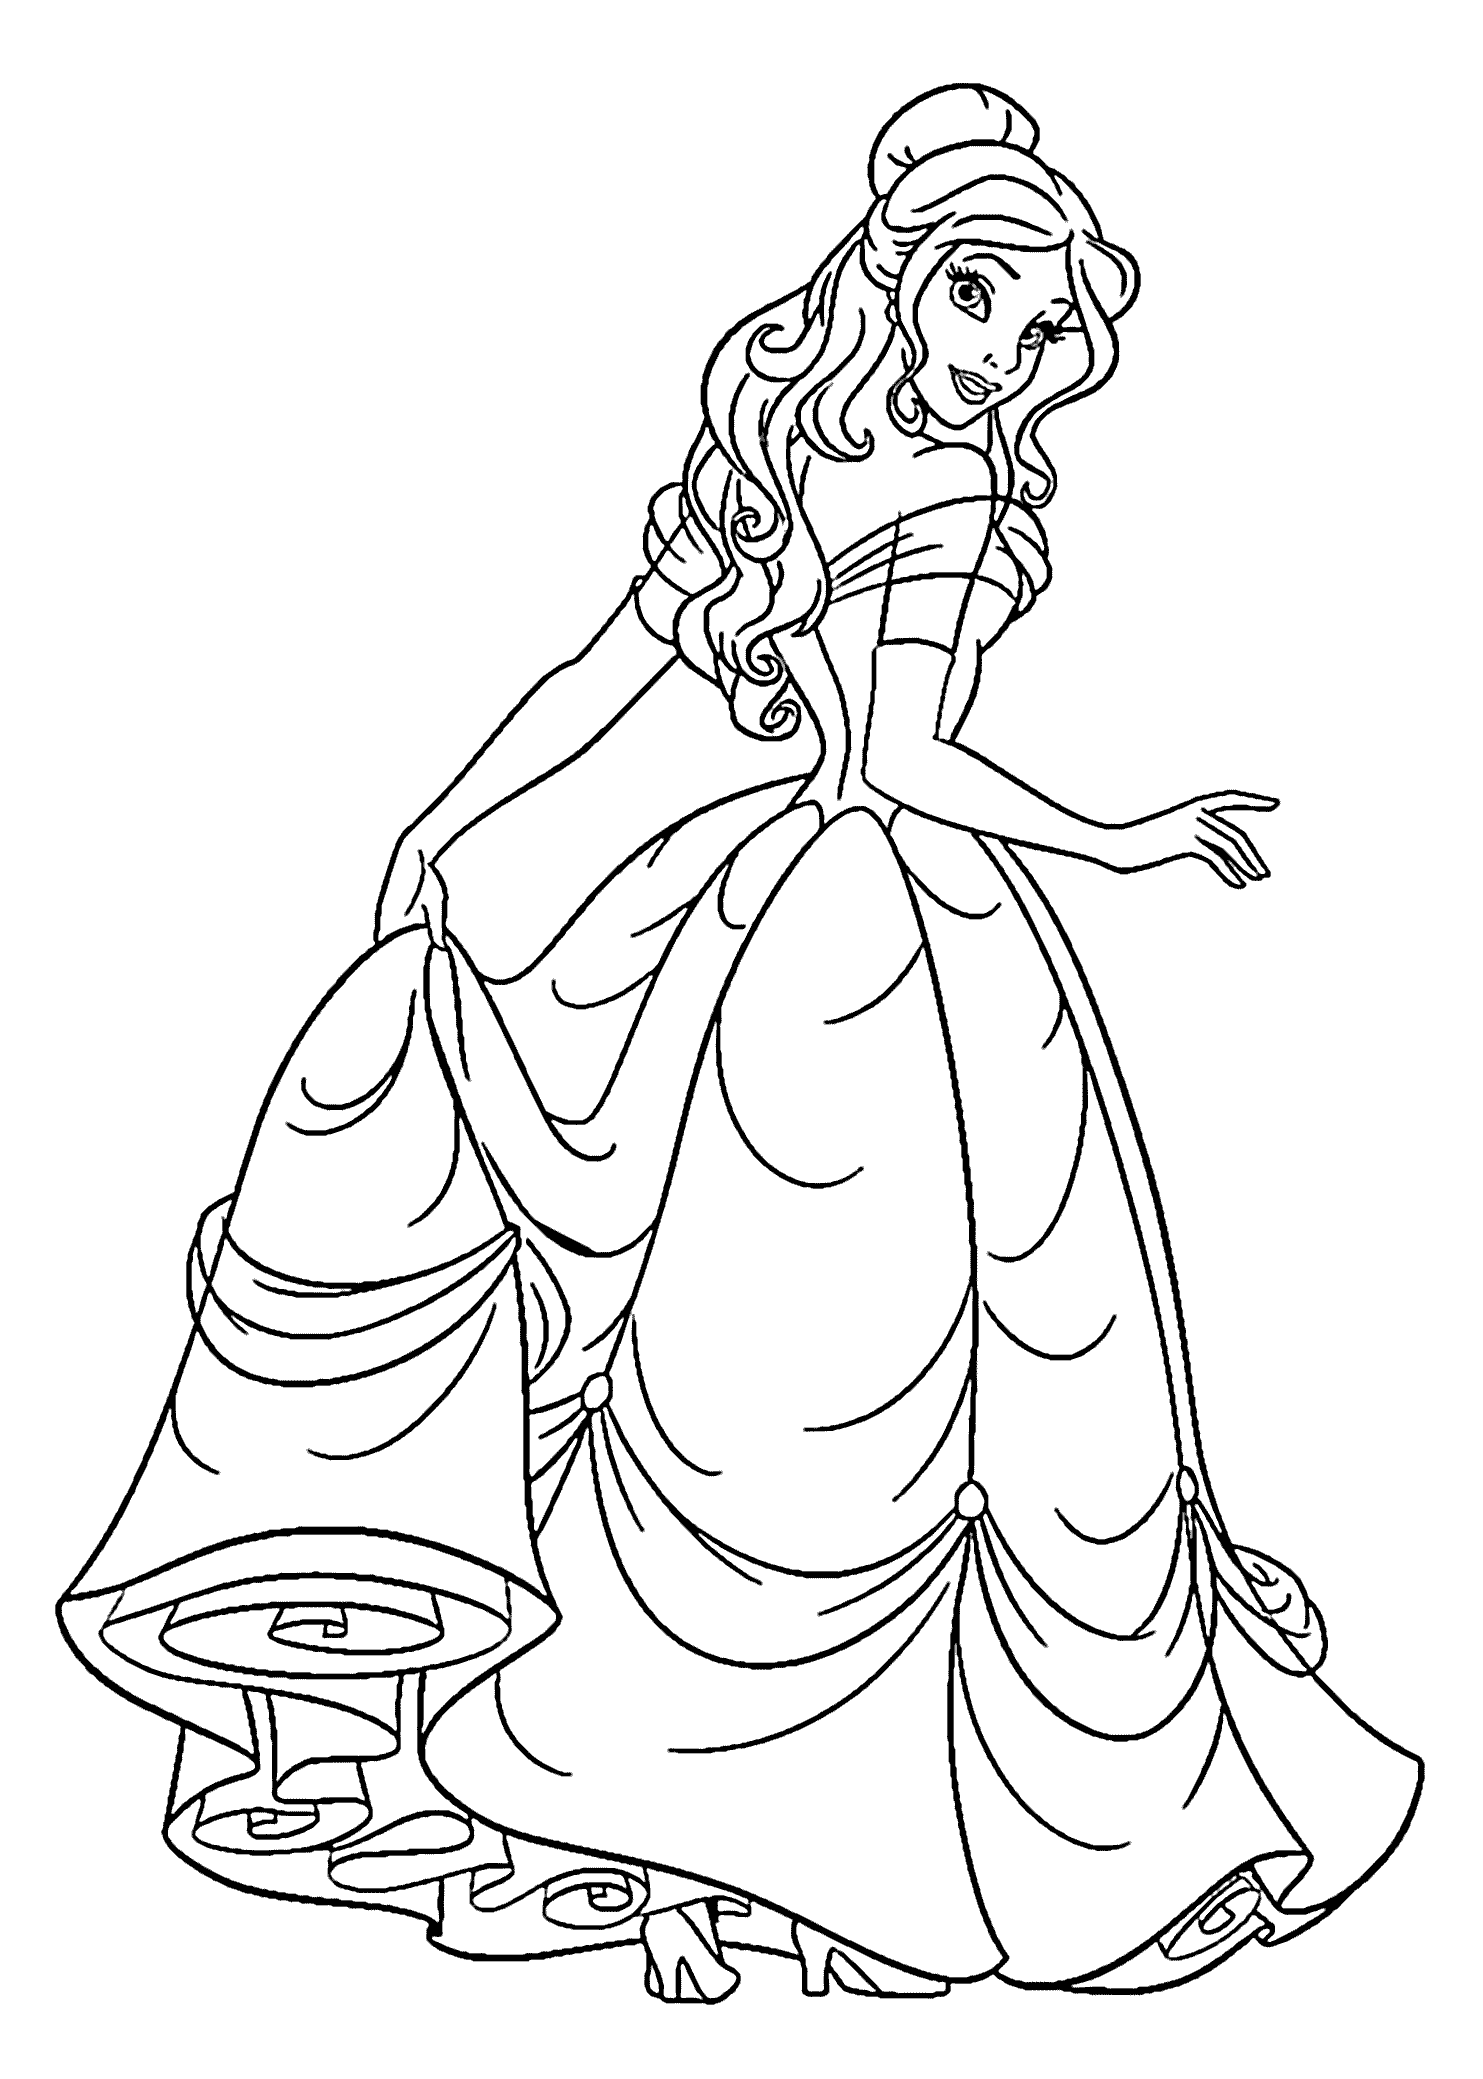 Beauty and the beast coloring pages and pictures - Print Color Craft